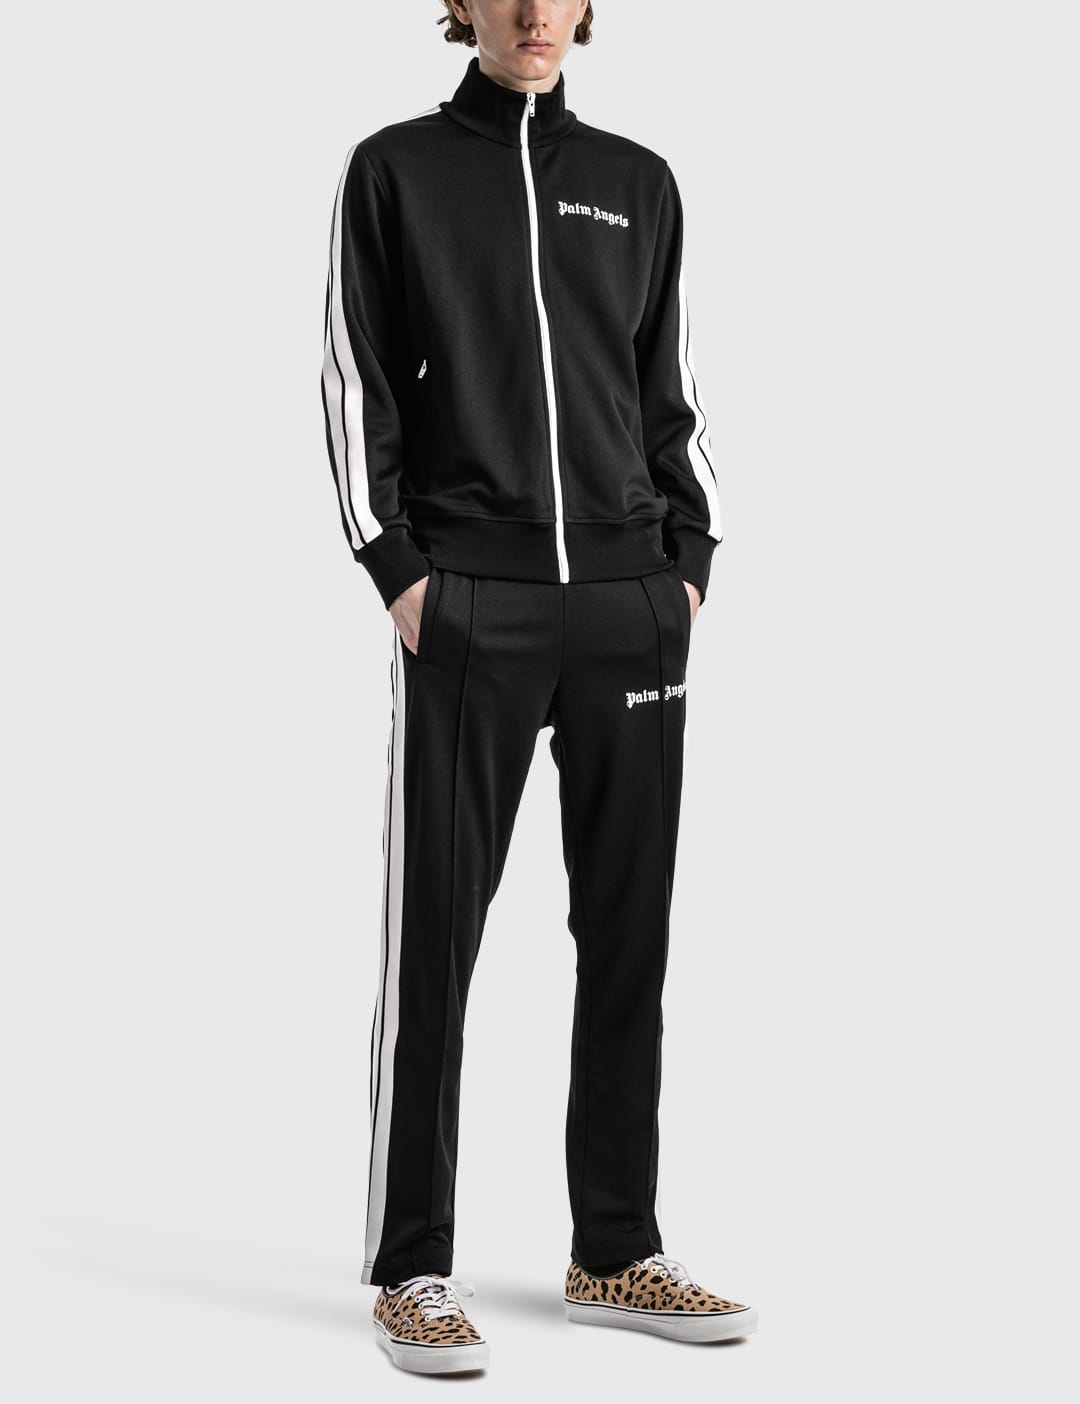 Palm Angels - Classic Track Jacket | HBX - Globally Curated 